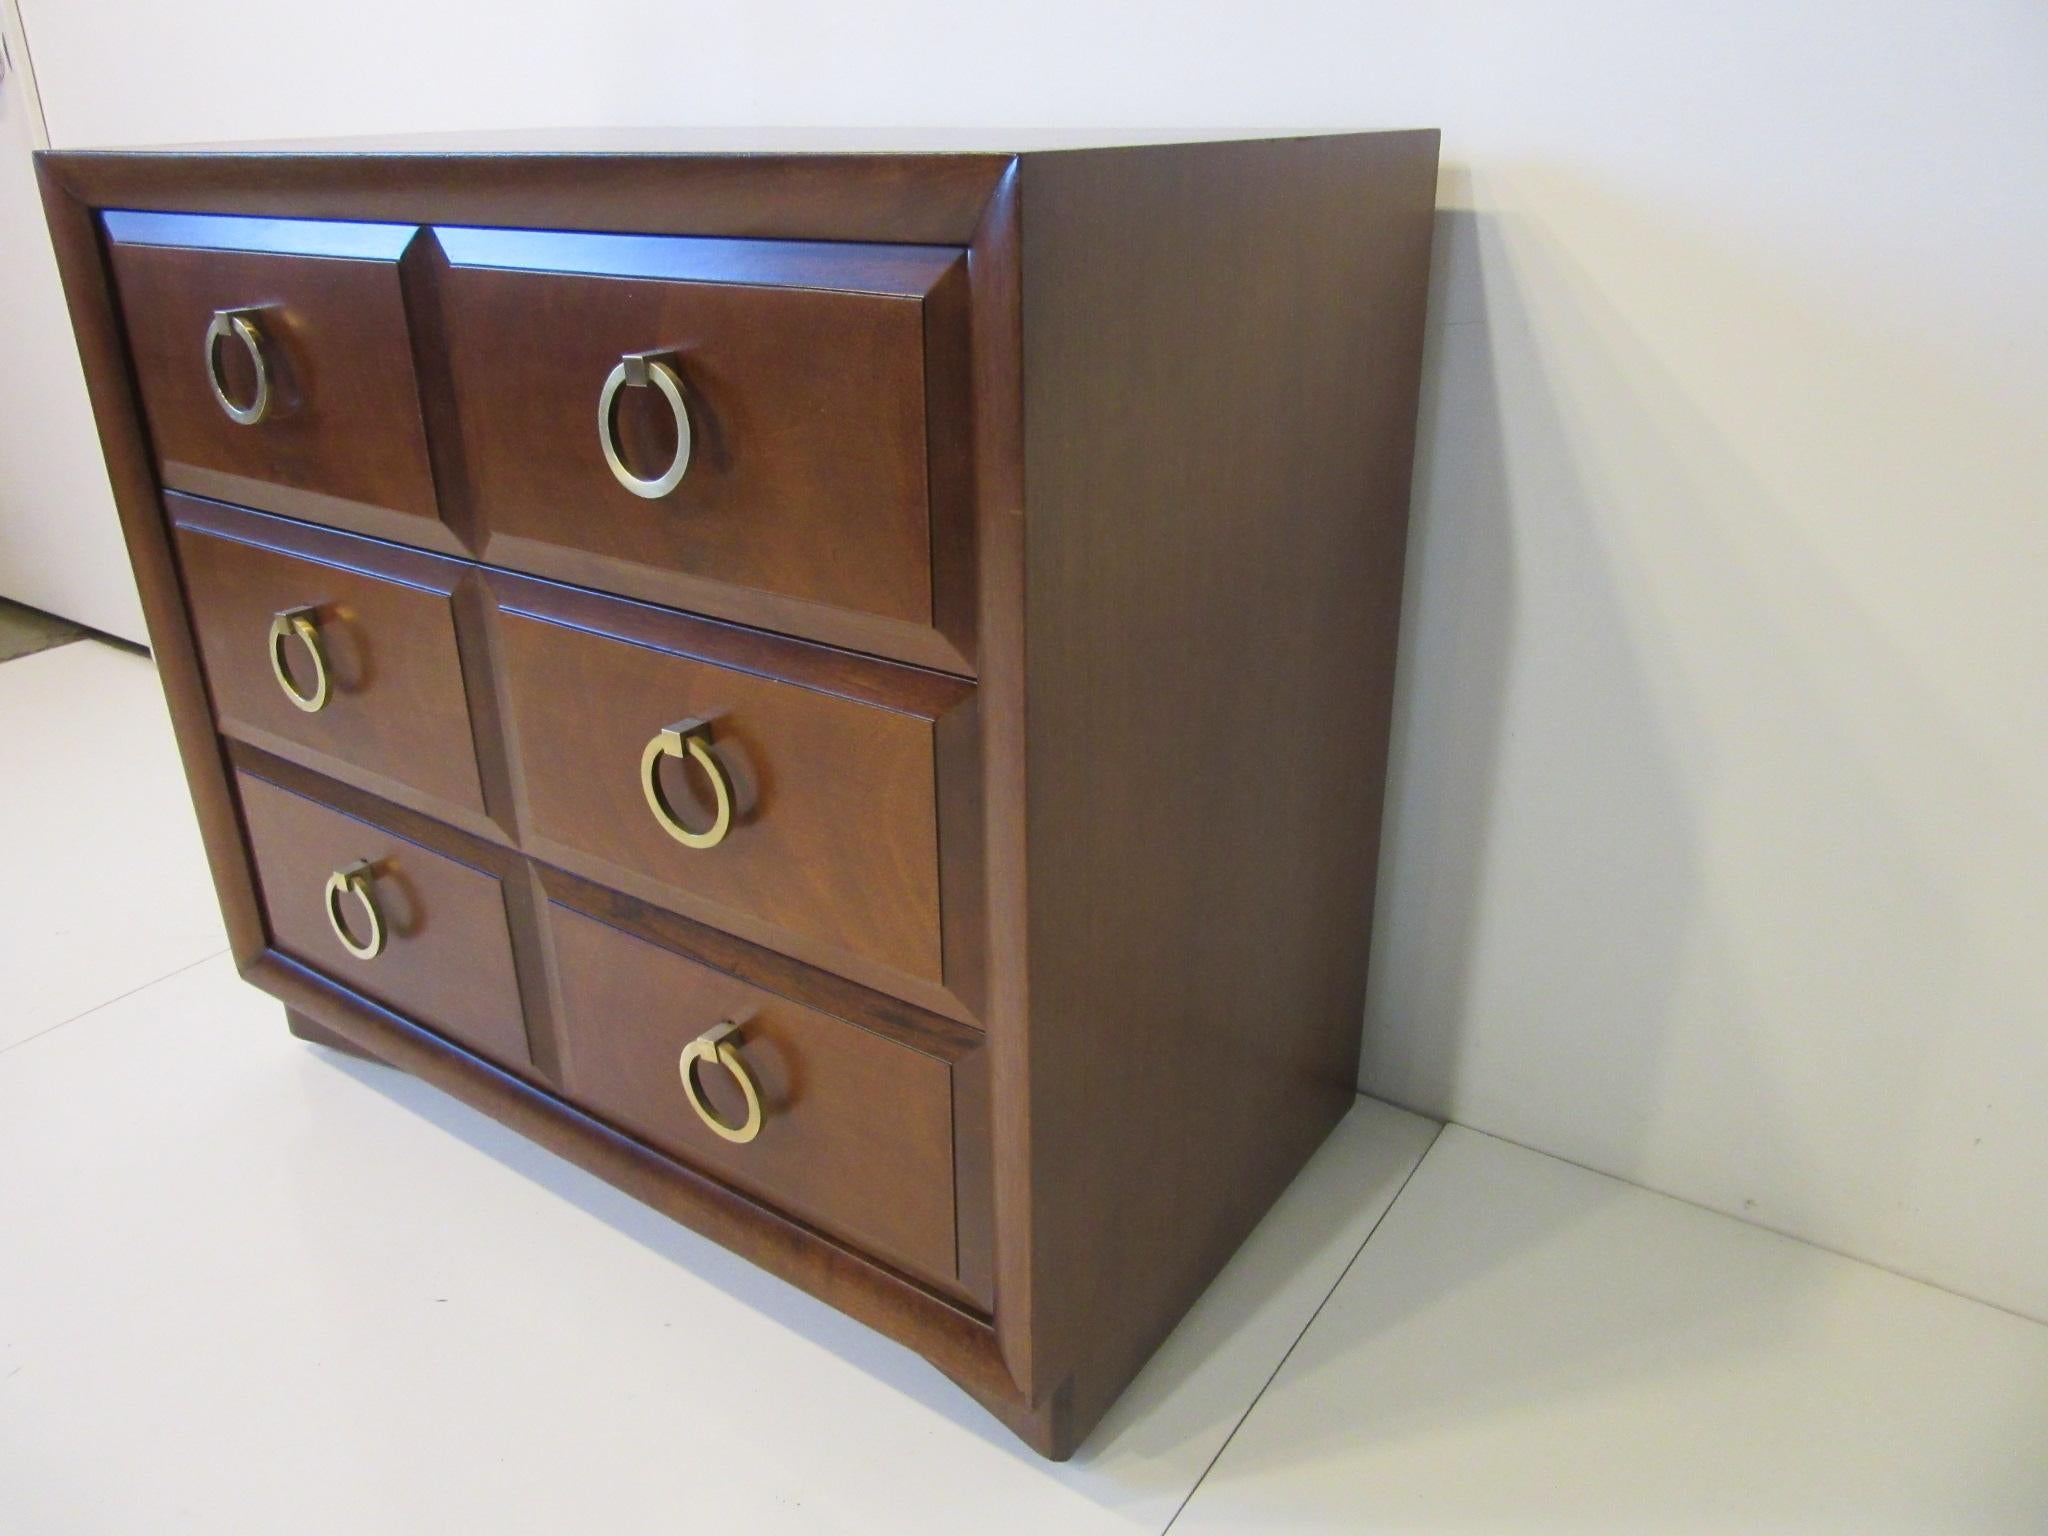 A well crafted three drawer medium dark mahogany dresser / chest with heavy brass ring pulls sitting on a curved kick base. Retains the original manufactures tag by the Widdicomb Furniture company Grand Rapids Michigan, a nice smaller sized chest